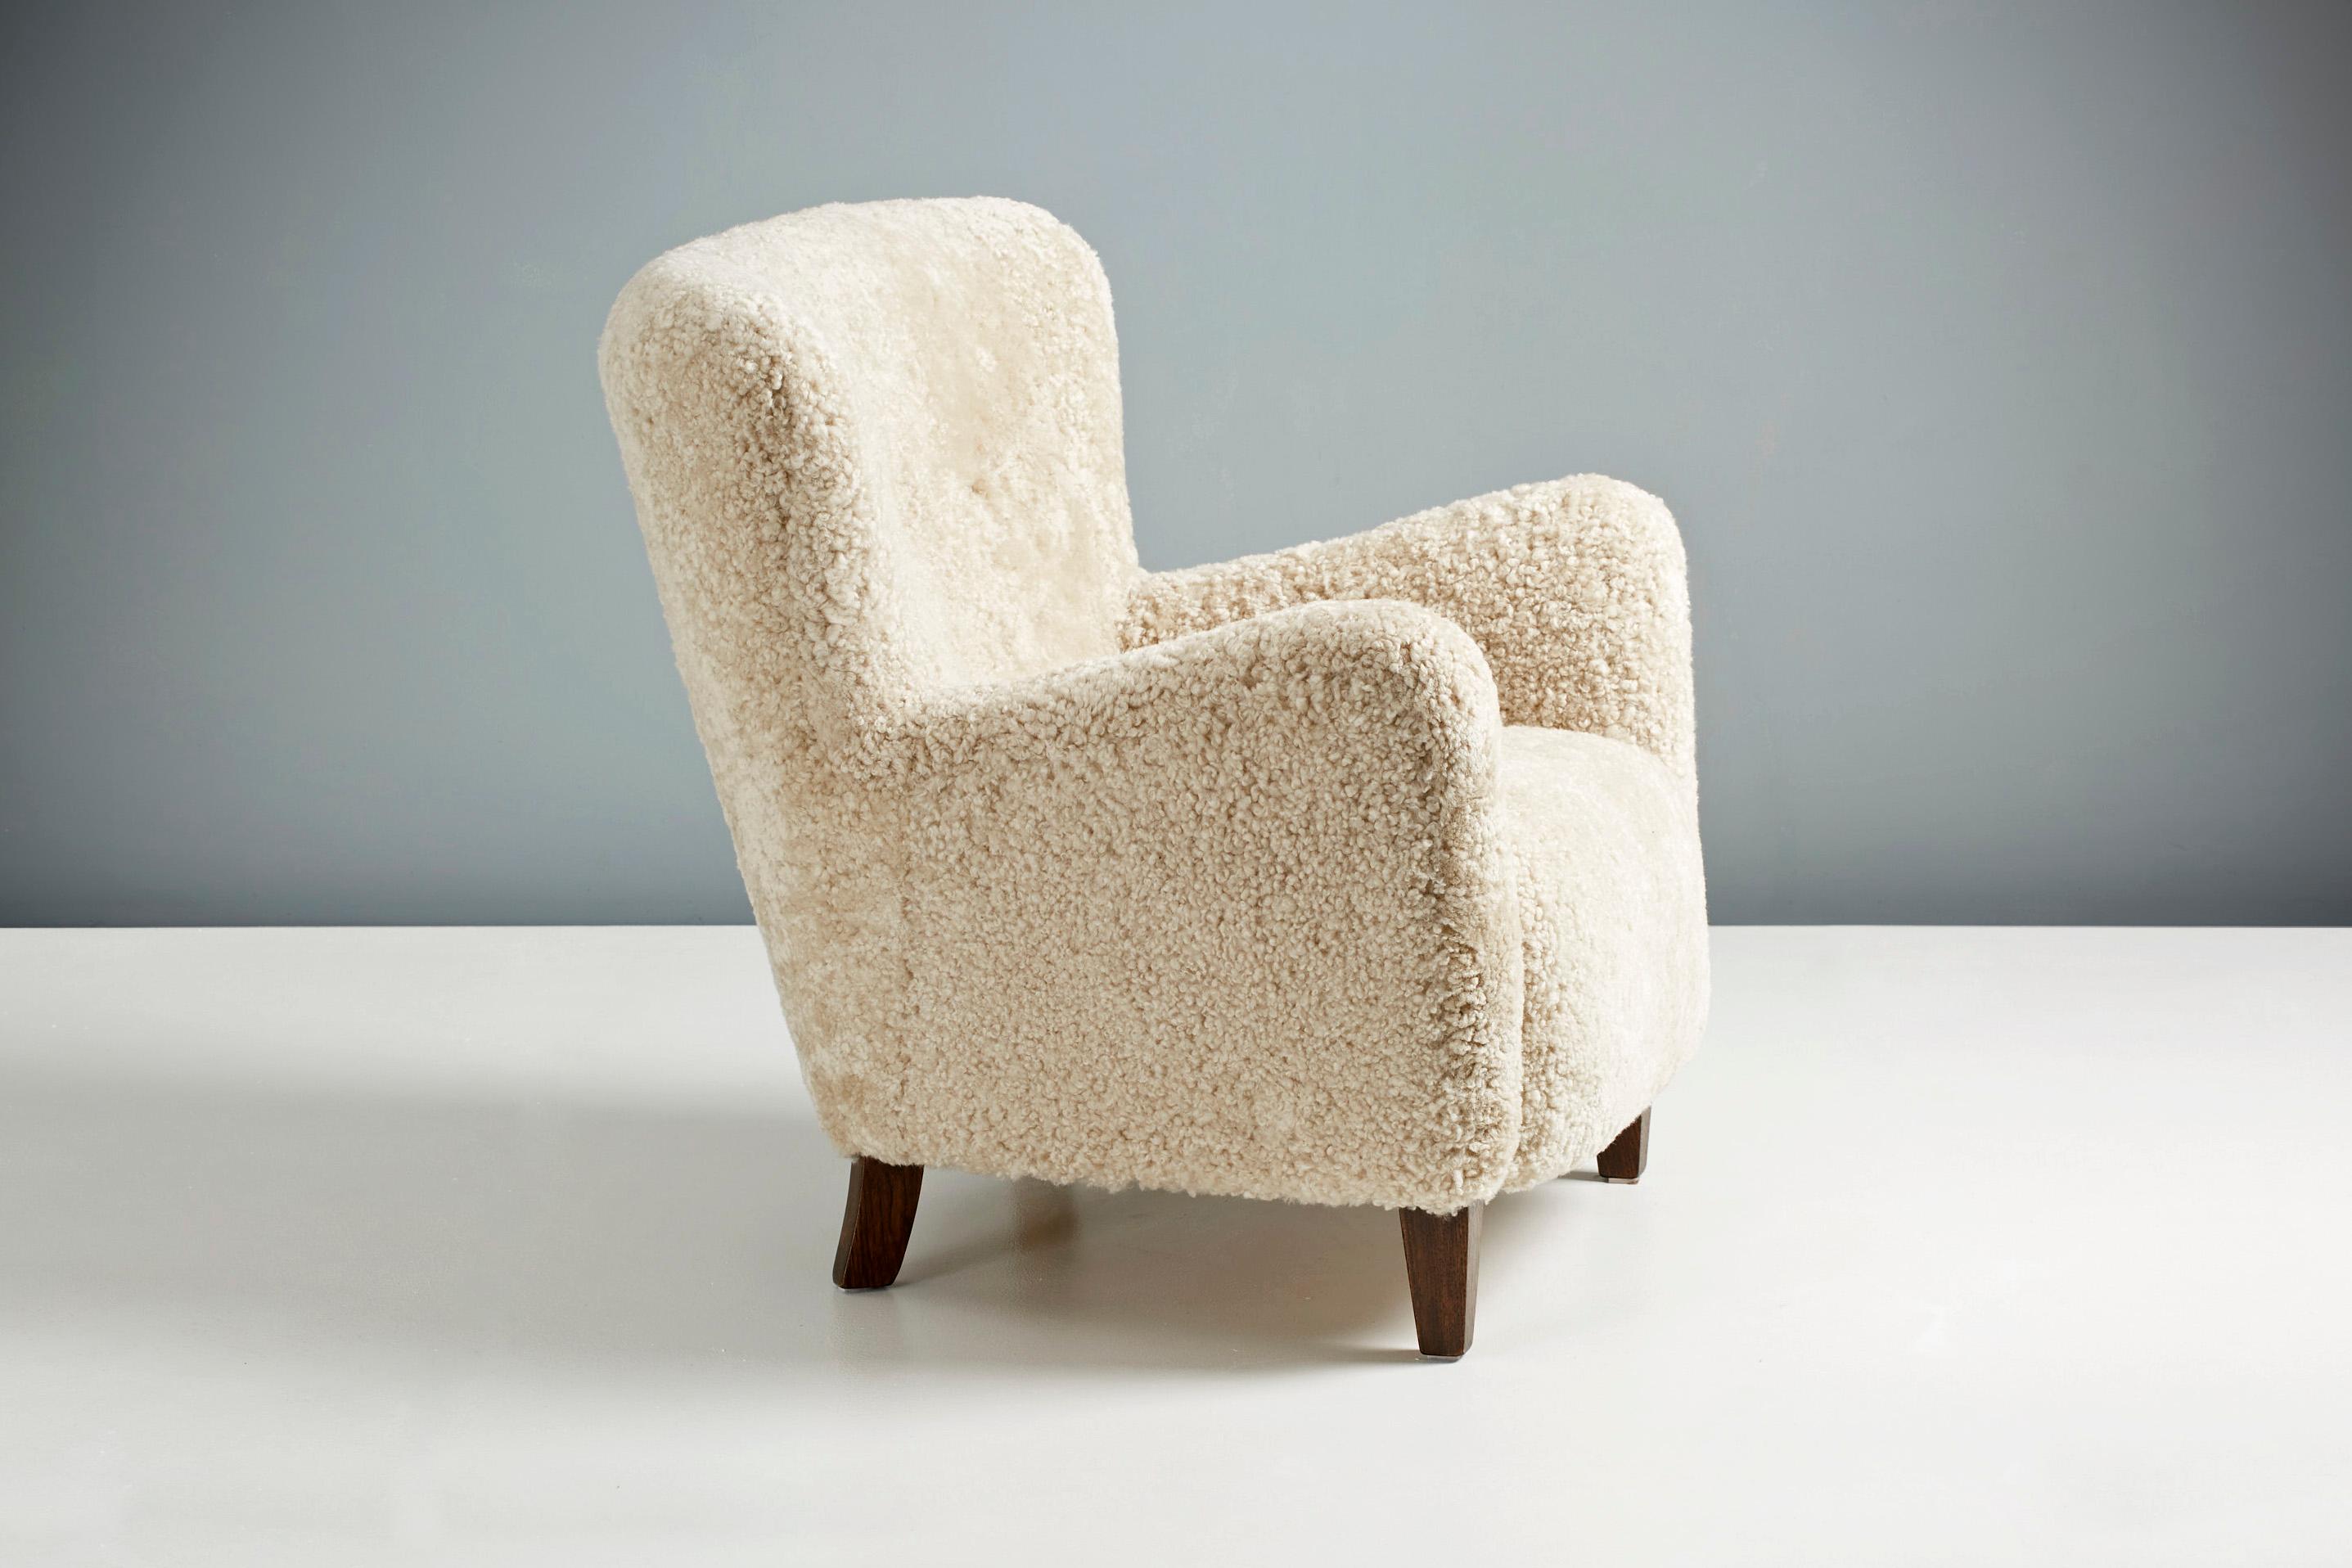 Dagmar design

Ryo armchair

A custom made armchair developed and produced at our workshops in London using the highest quality materials. This example is upholstered in luxurious Australian 'Moonlight' sheepskin with fumed oak legs. The Ryo